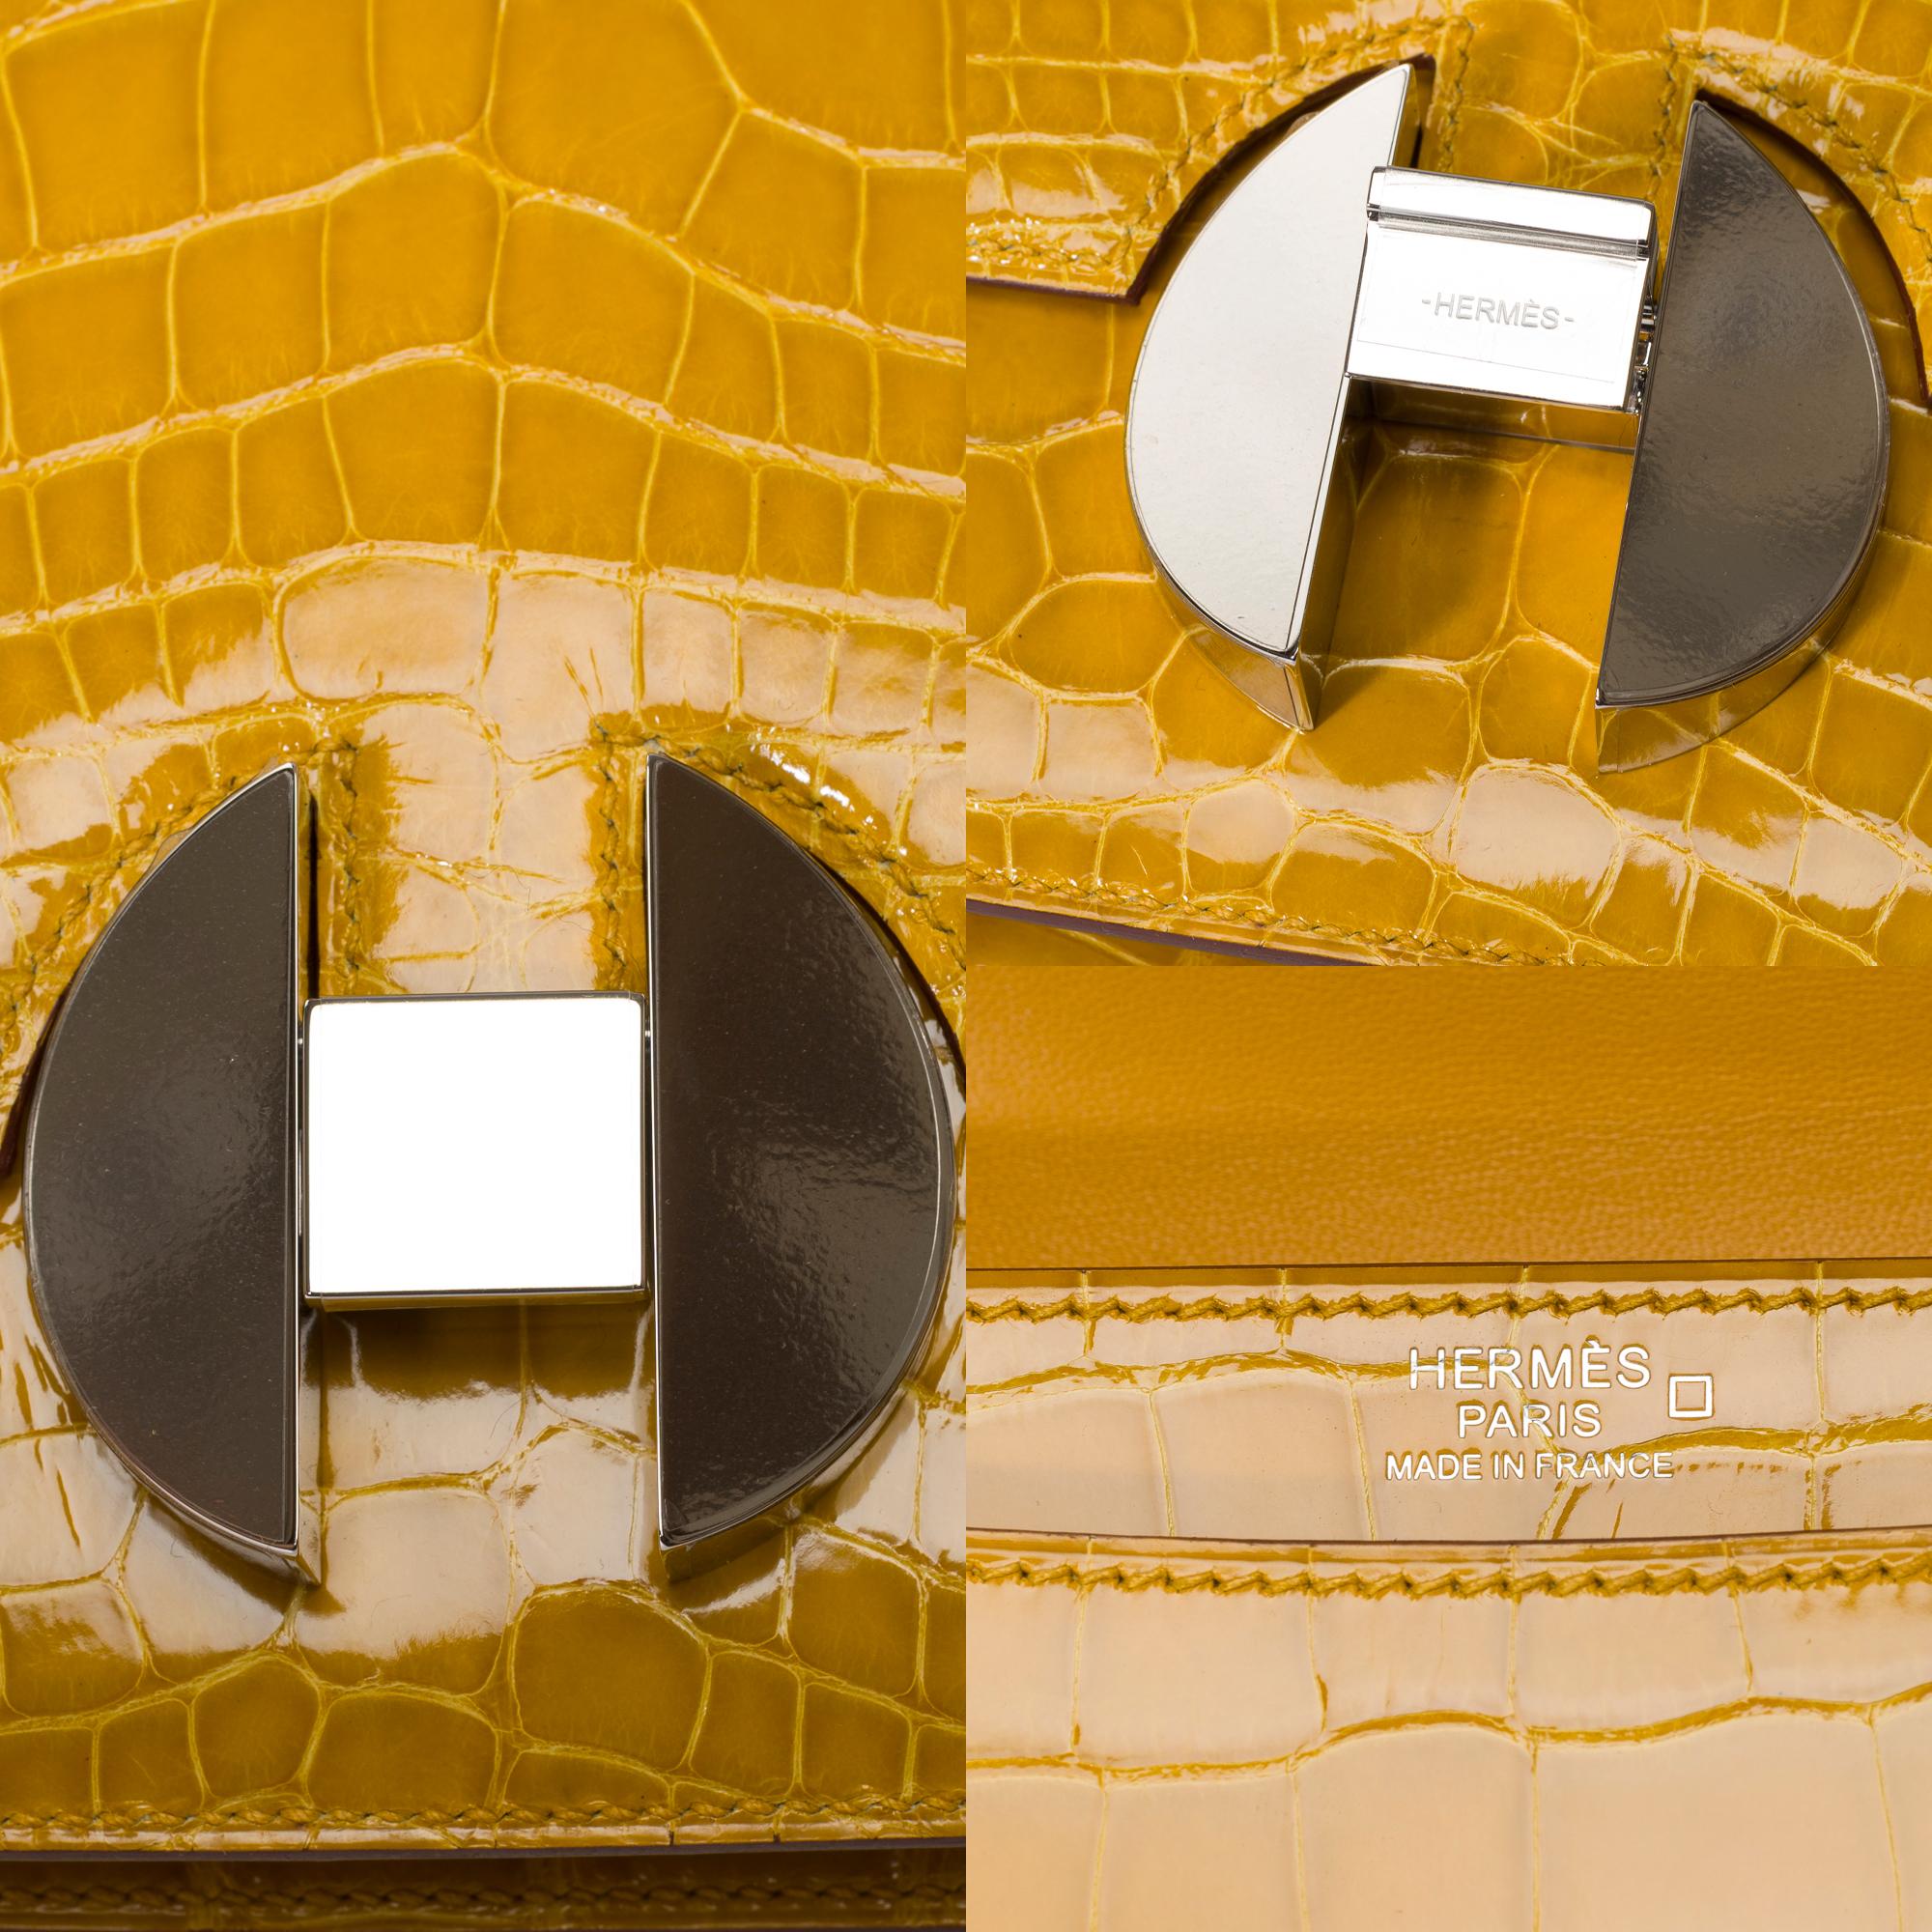 New Rare Hermes 2002 shoulder bag in Ambre Yellow Alligator leather, SHW For Sale 3